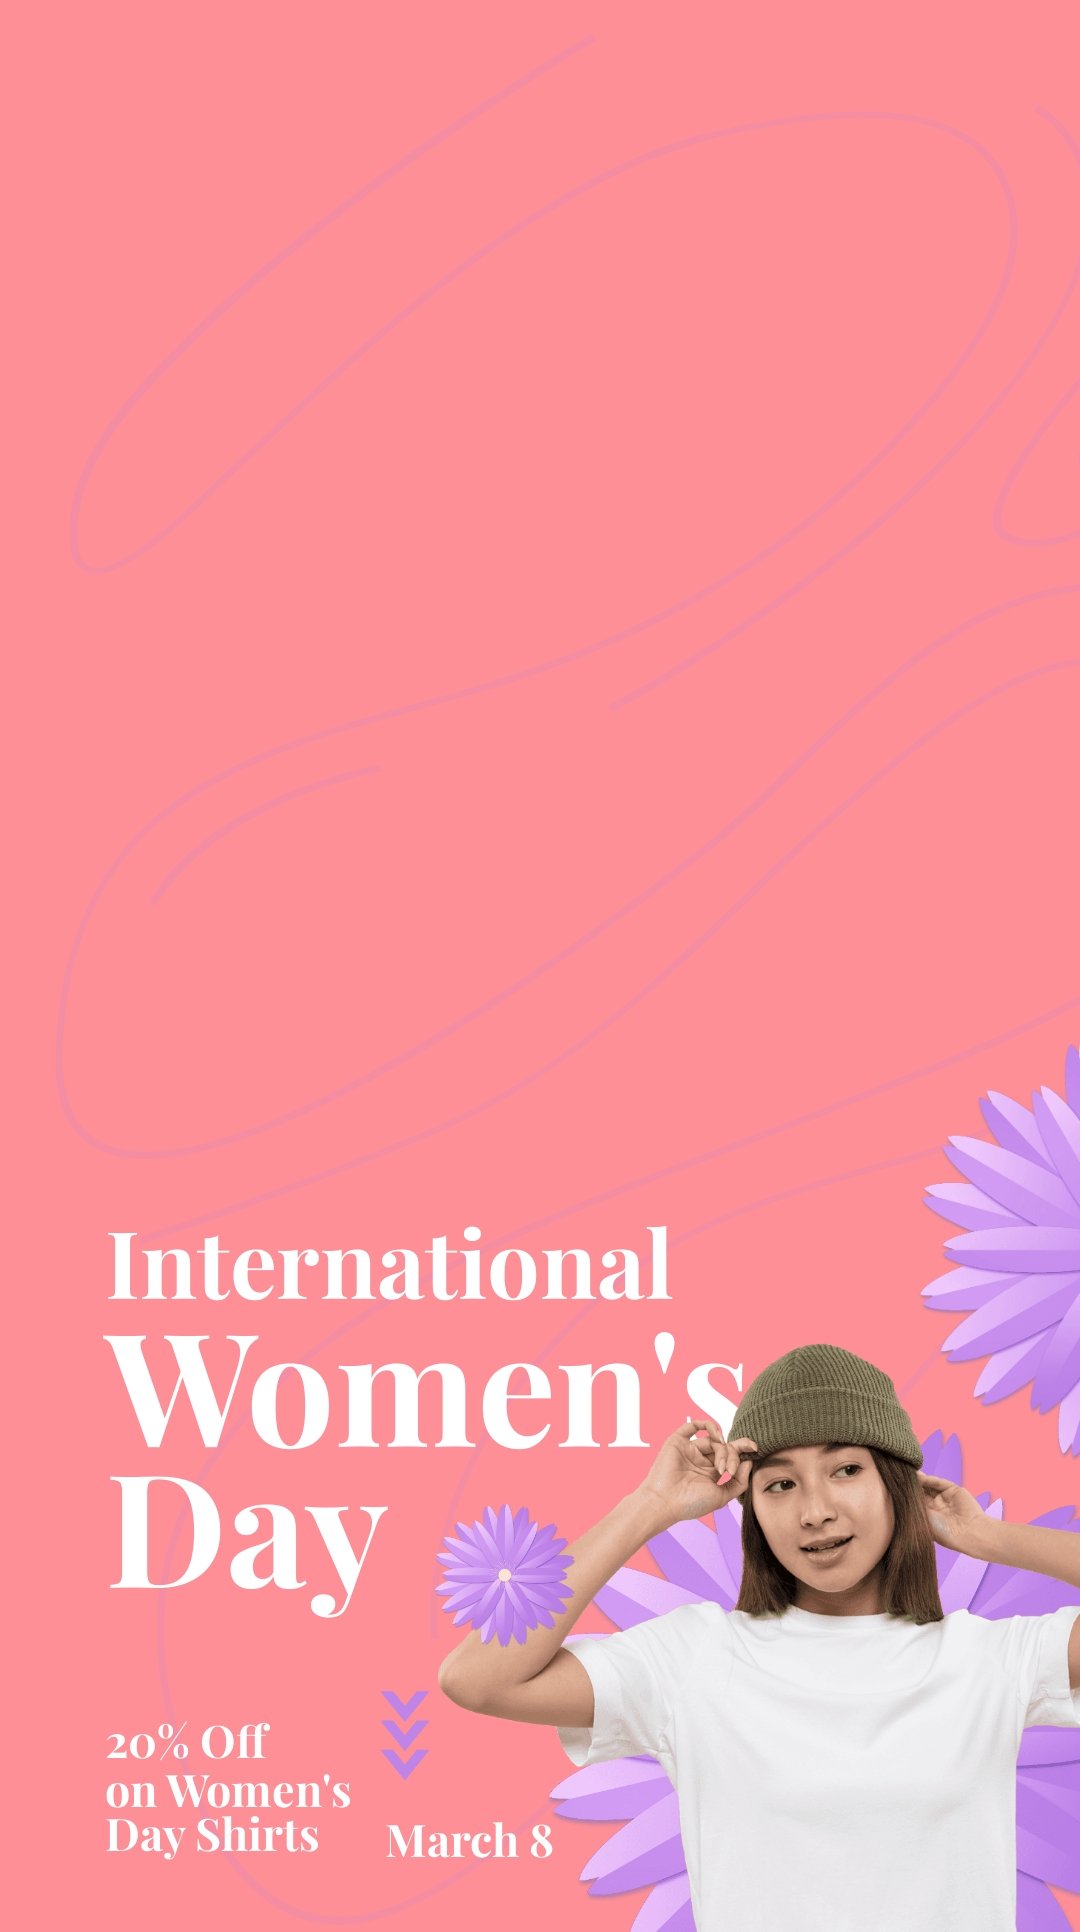 Women's Day Offer Snapchat Geofilter Template